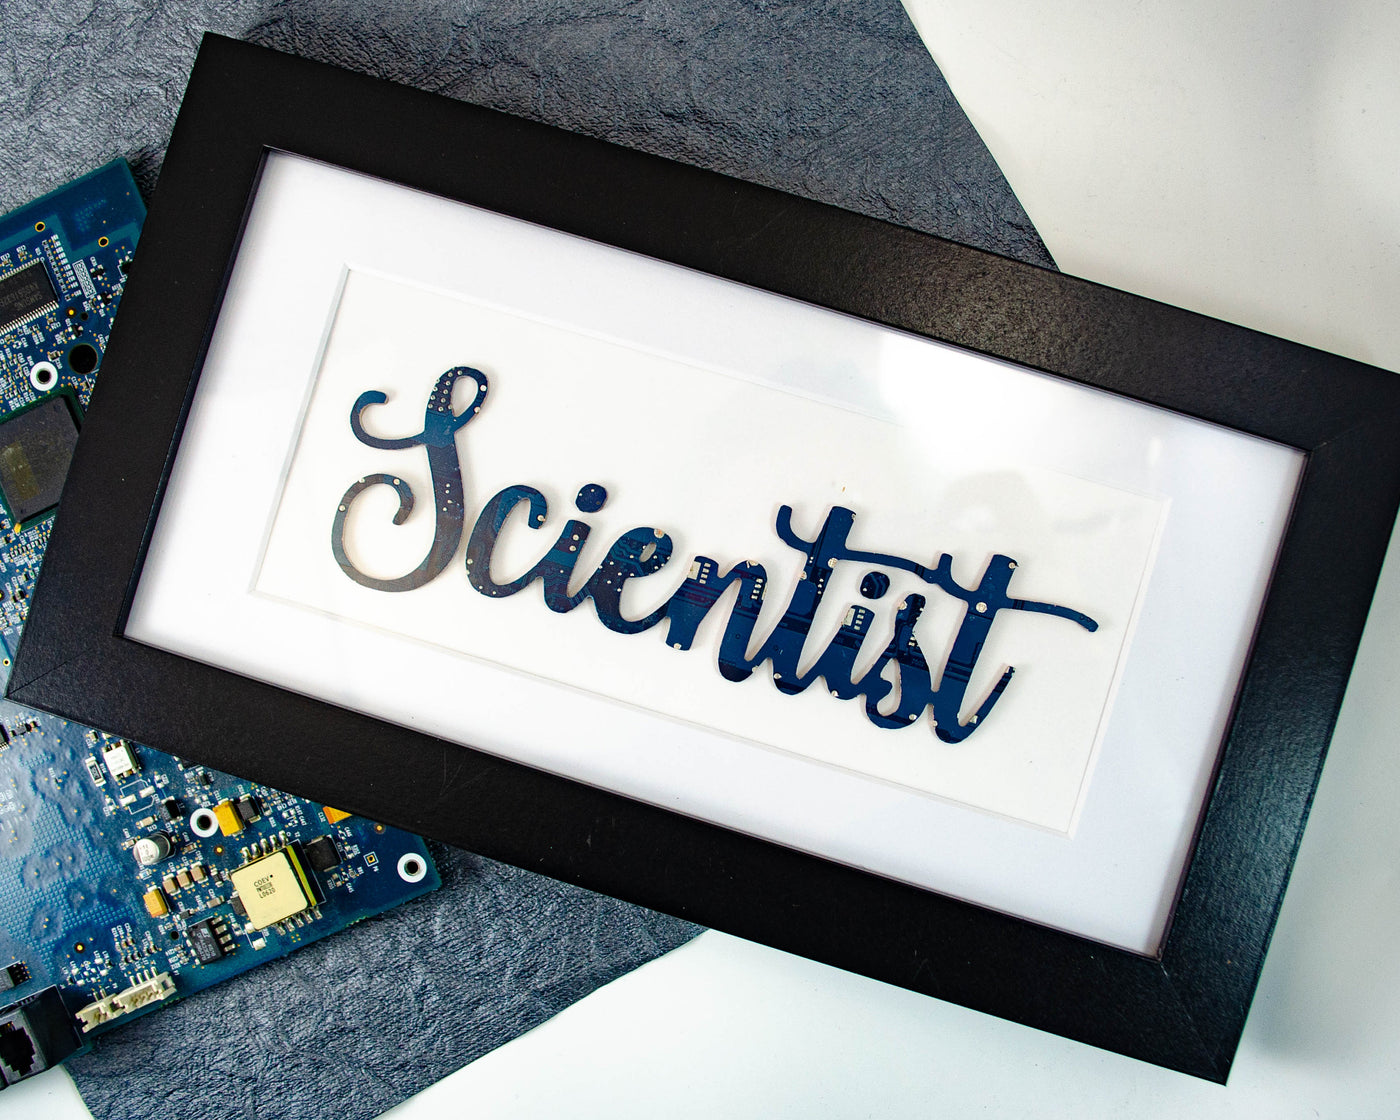 handmade framed art piece with scientist written in a hand lettered style made from recycled circuit board